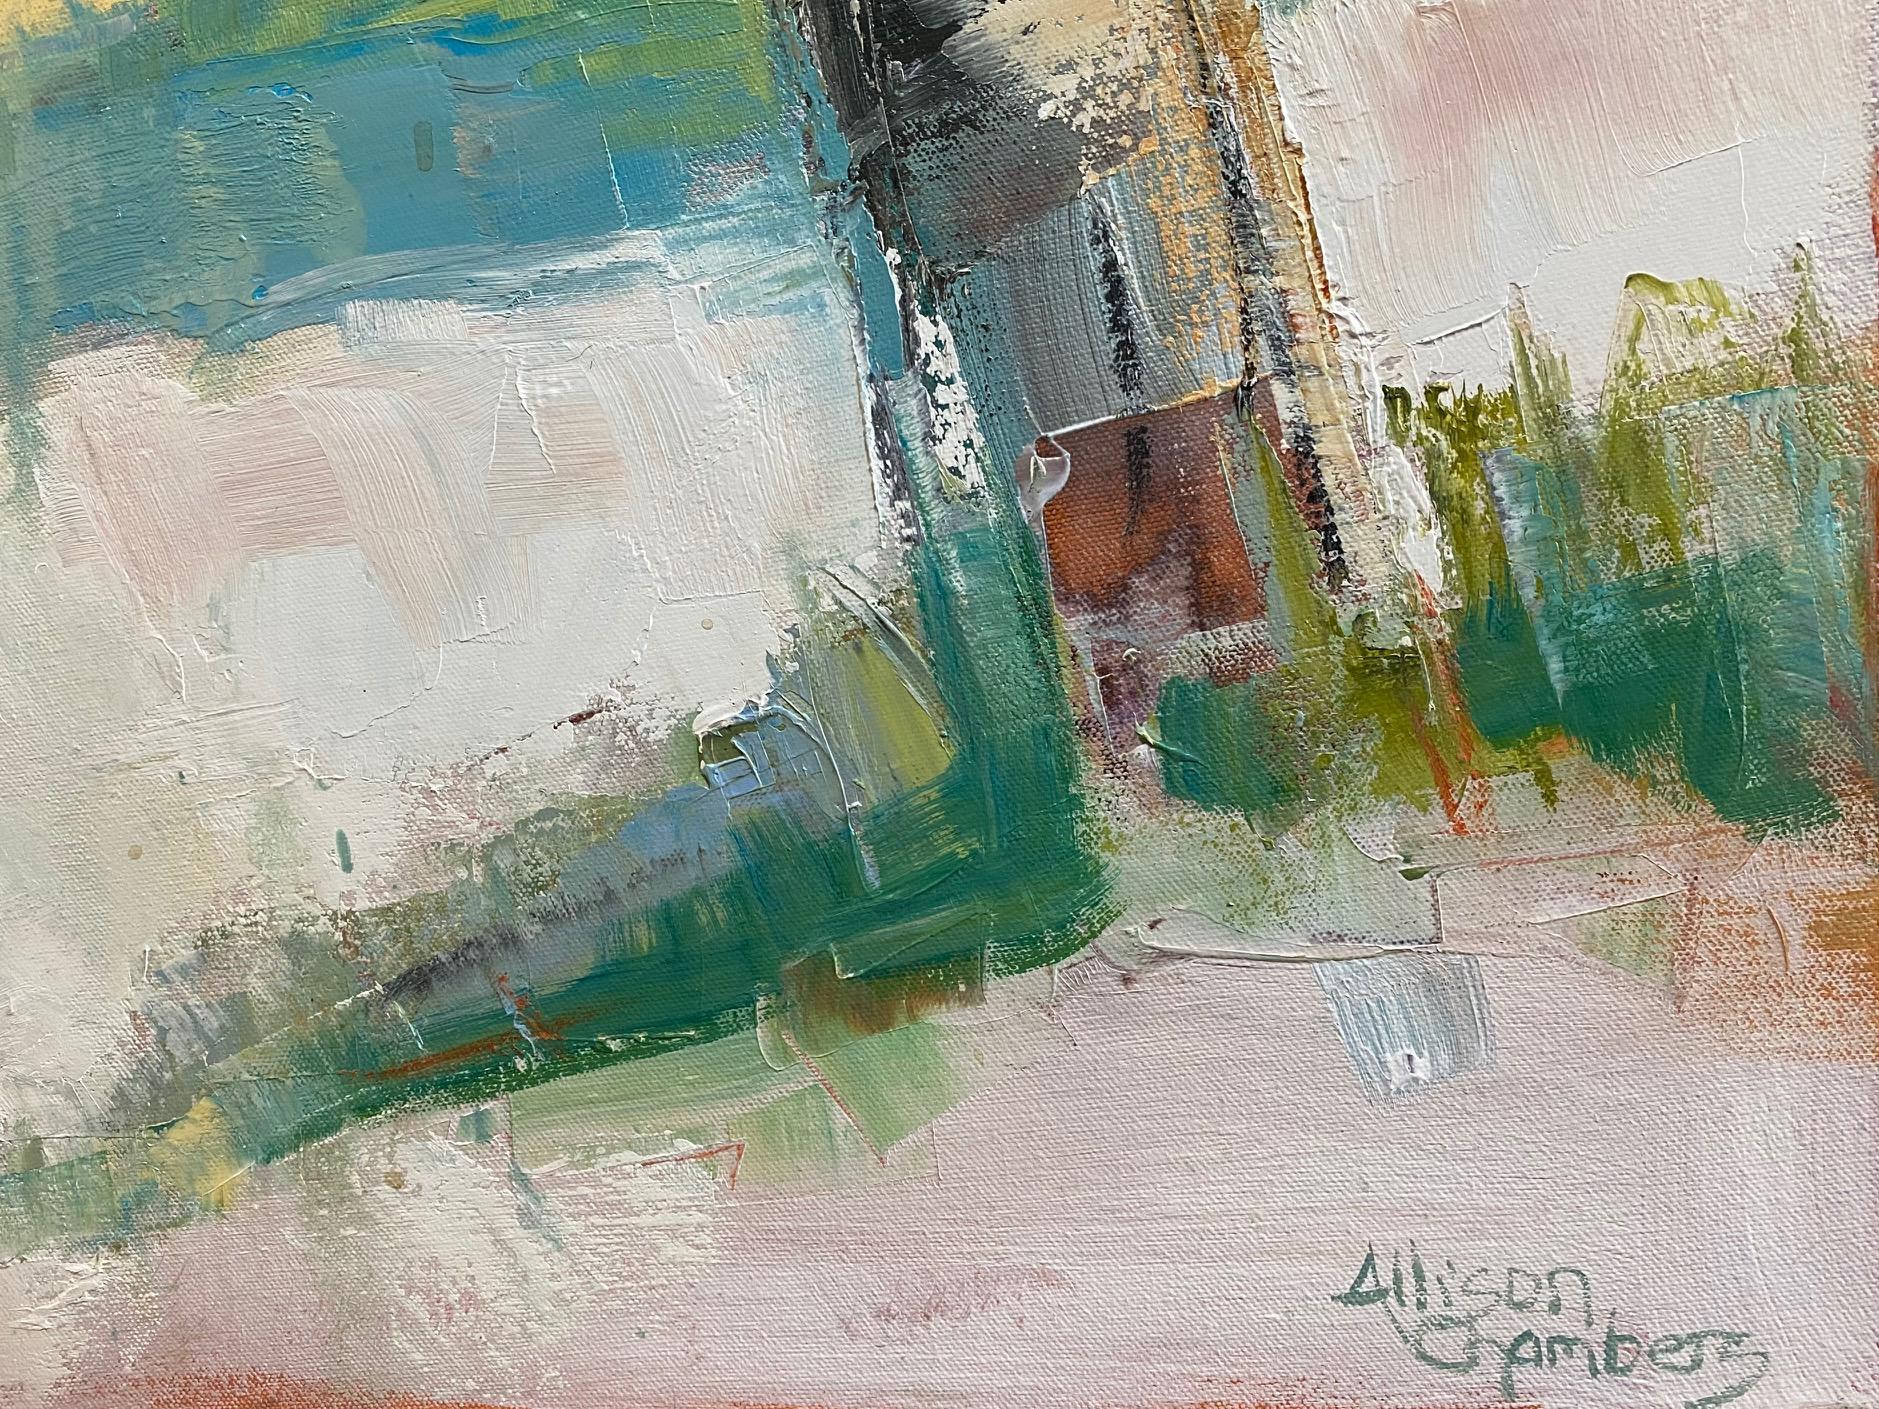 Life is blessed with magic and then more magic!  In this multi-faceted abstract expressionist landscape, painted with many nuances of color, and the extensive use of impasto layering to add emphasis, North Carolina artist Allison Chambers explores